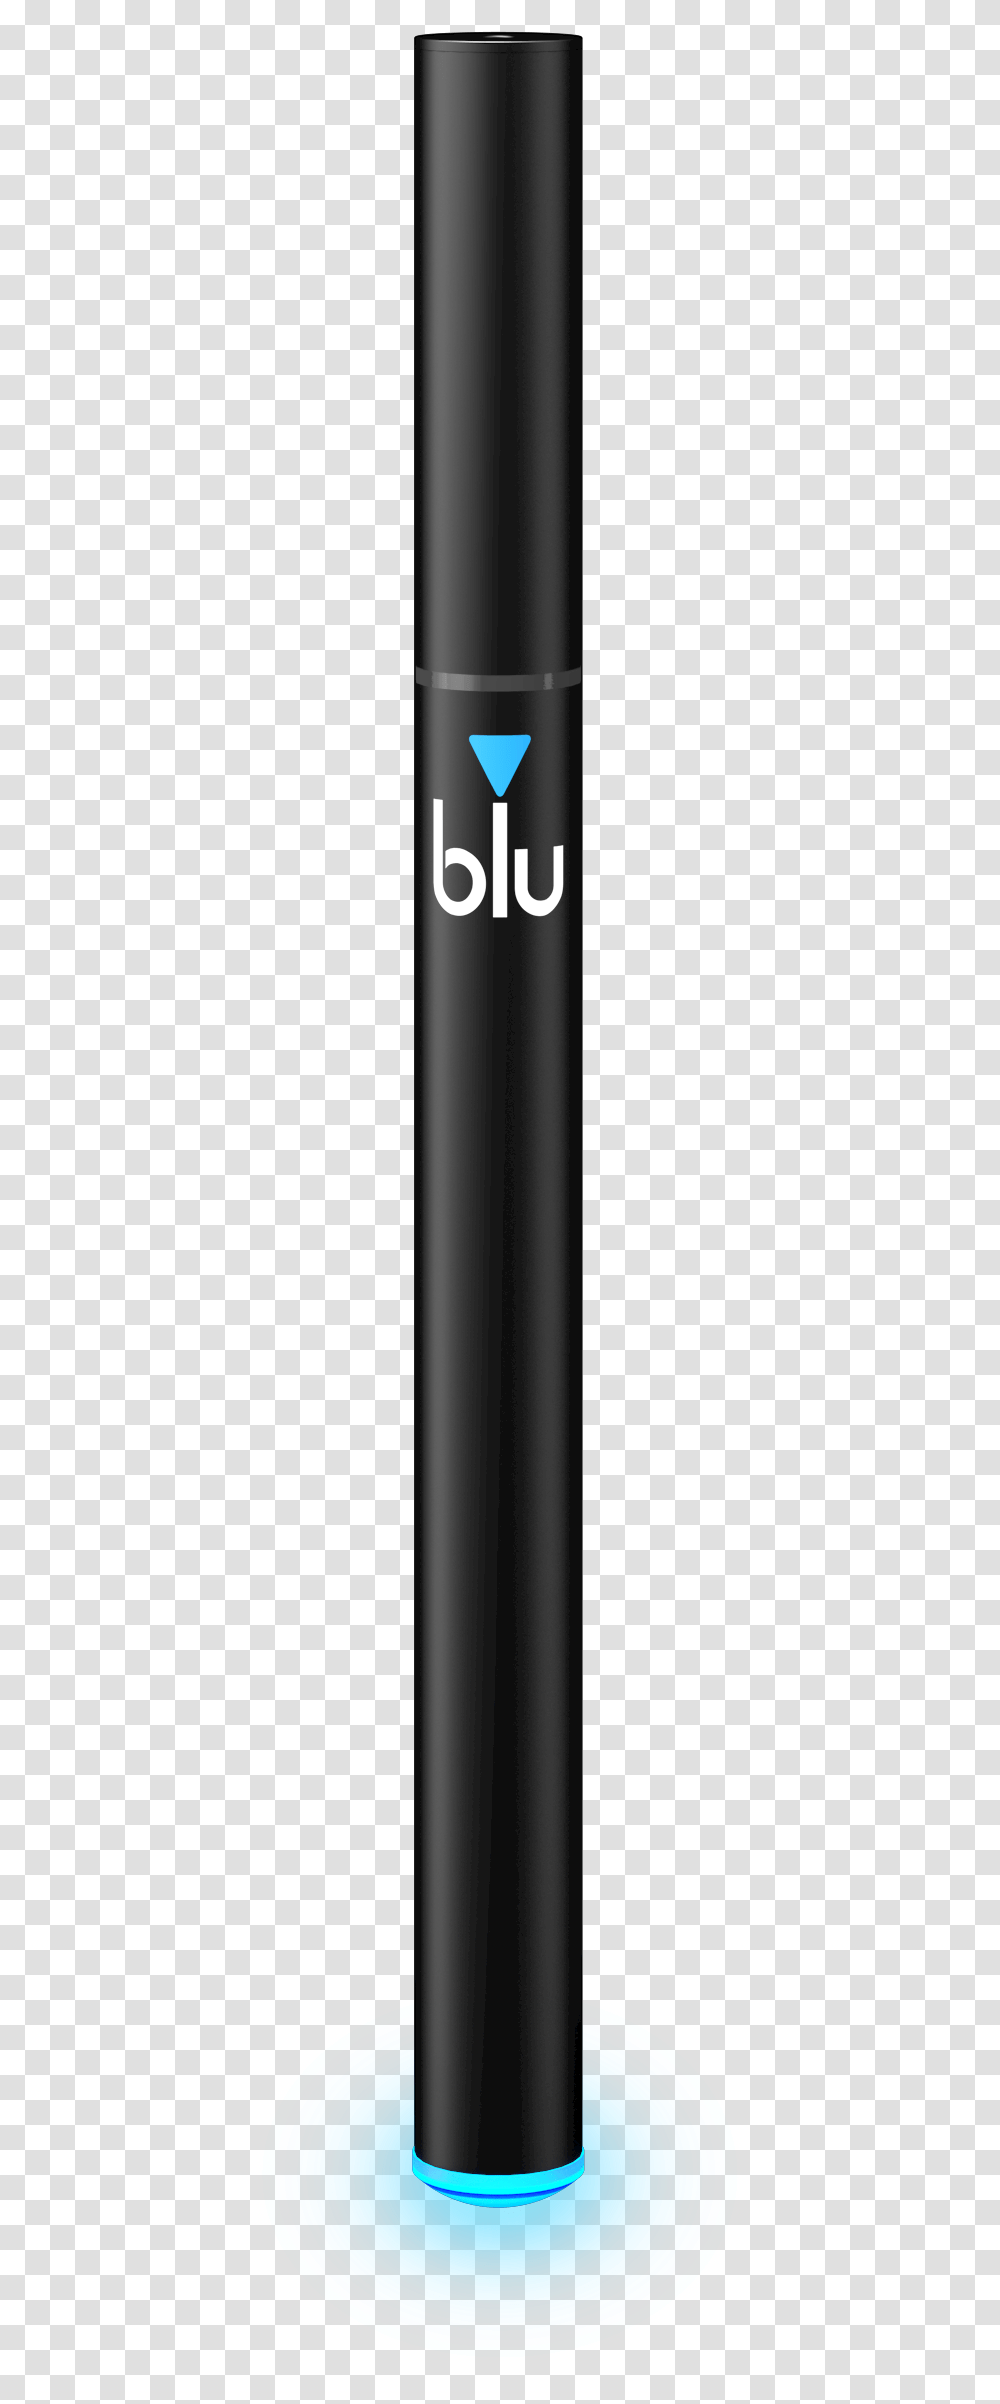 Blu Disposable Device Upright Front Mobile Phone, Cosmetics, Lipstick Transparent Png